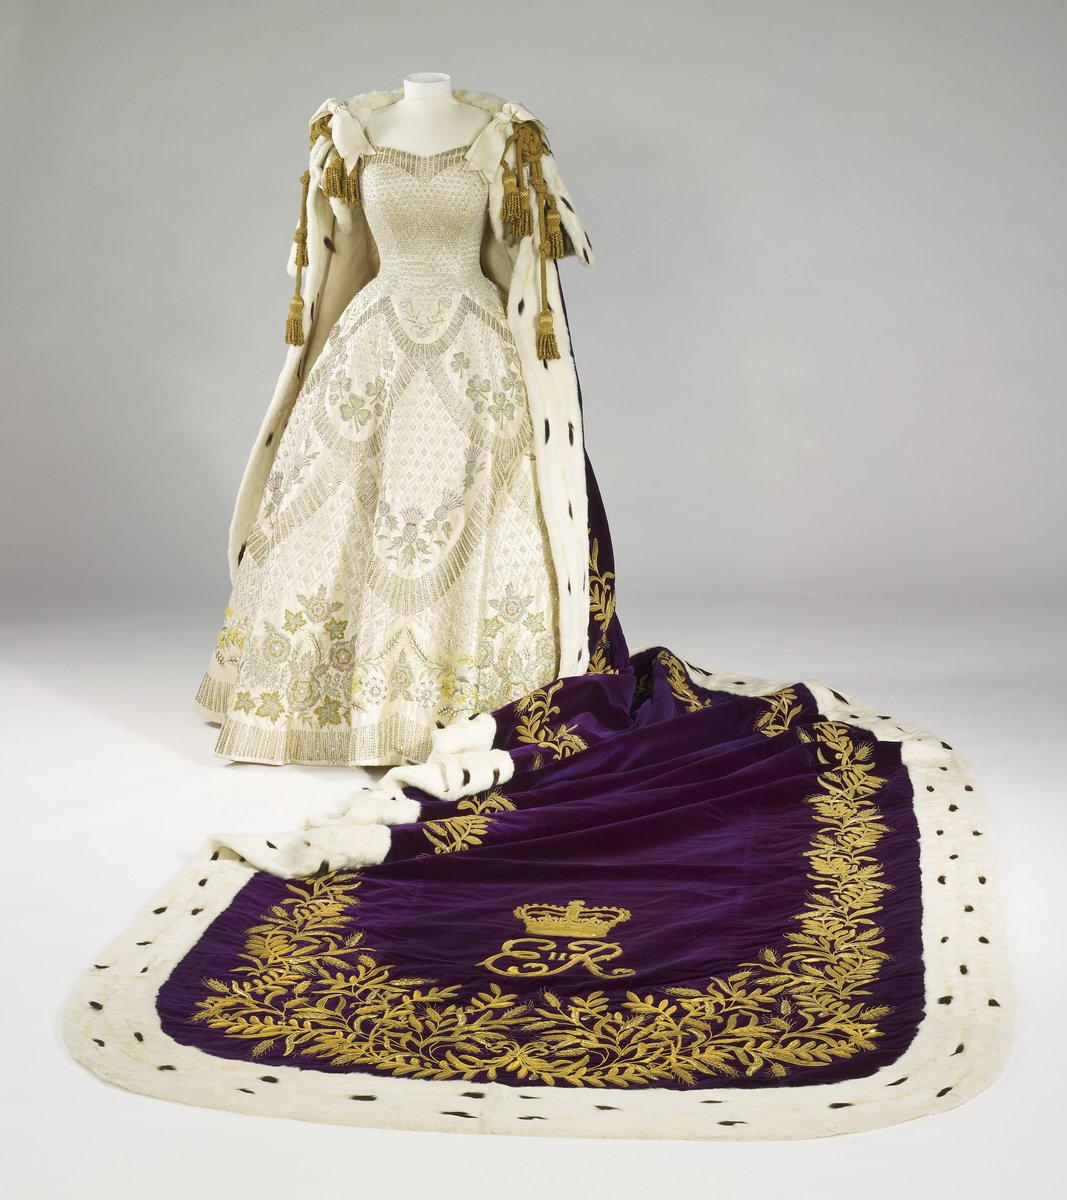 The Queen's Coronation Dress and The Robe of Estate